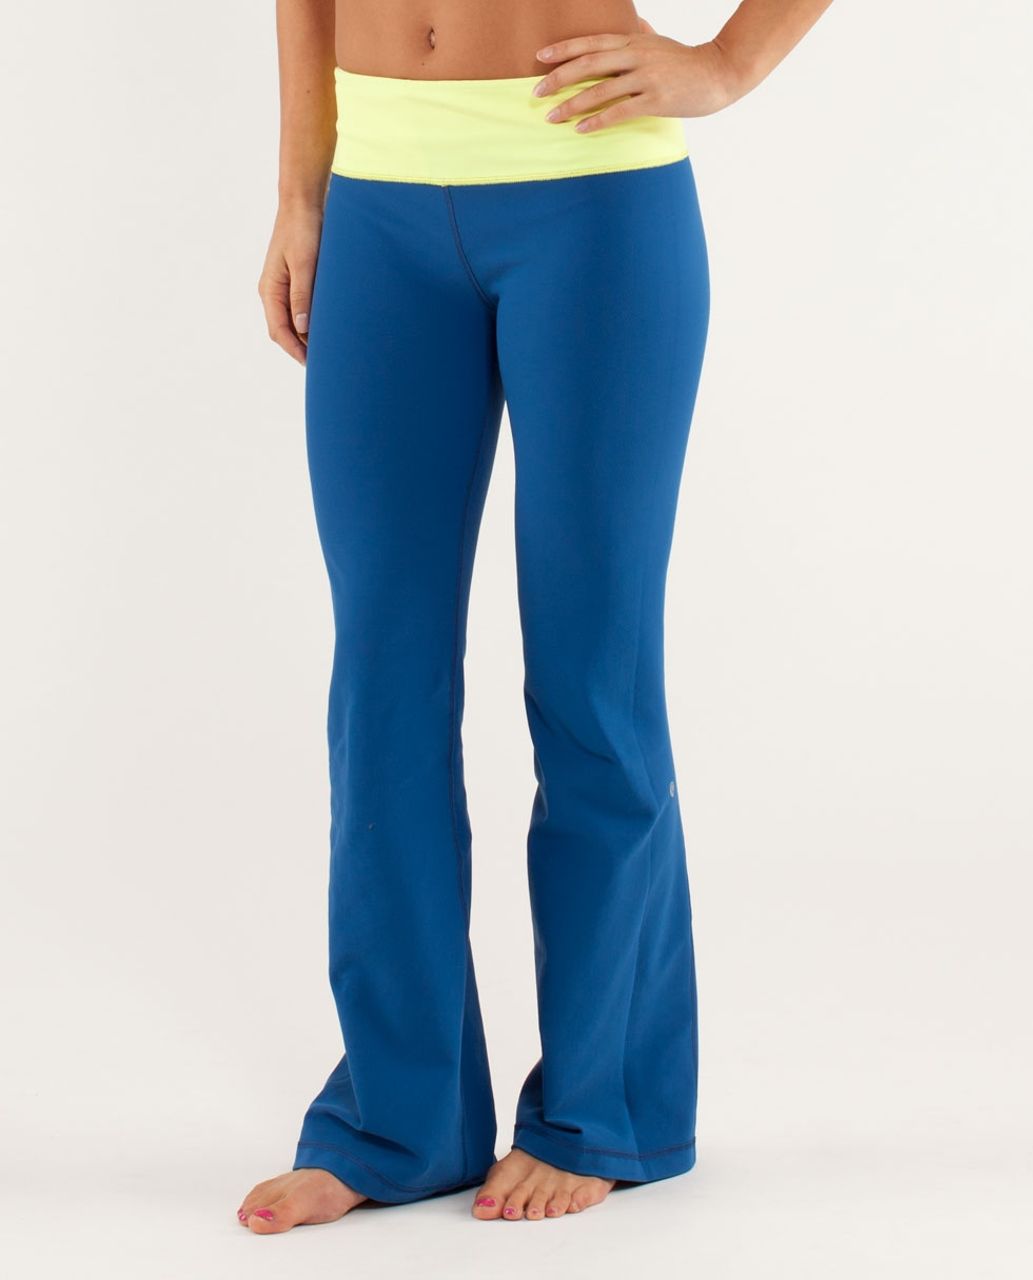 Lululemon Groove Pant *Slim (Regular) - Limitless Blue / Slope Stripe Polar Cream Clarity Yellow / Wee Are From Space Polar Crea